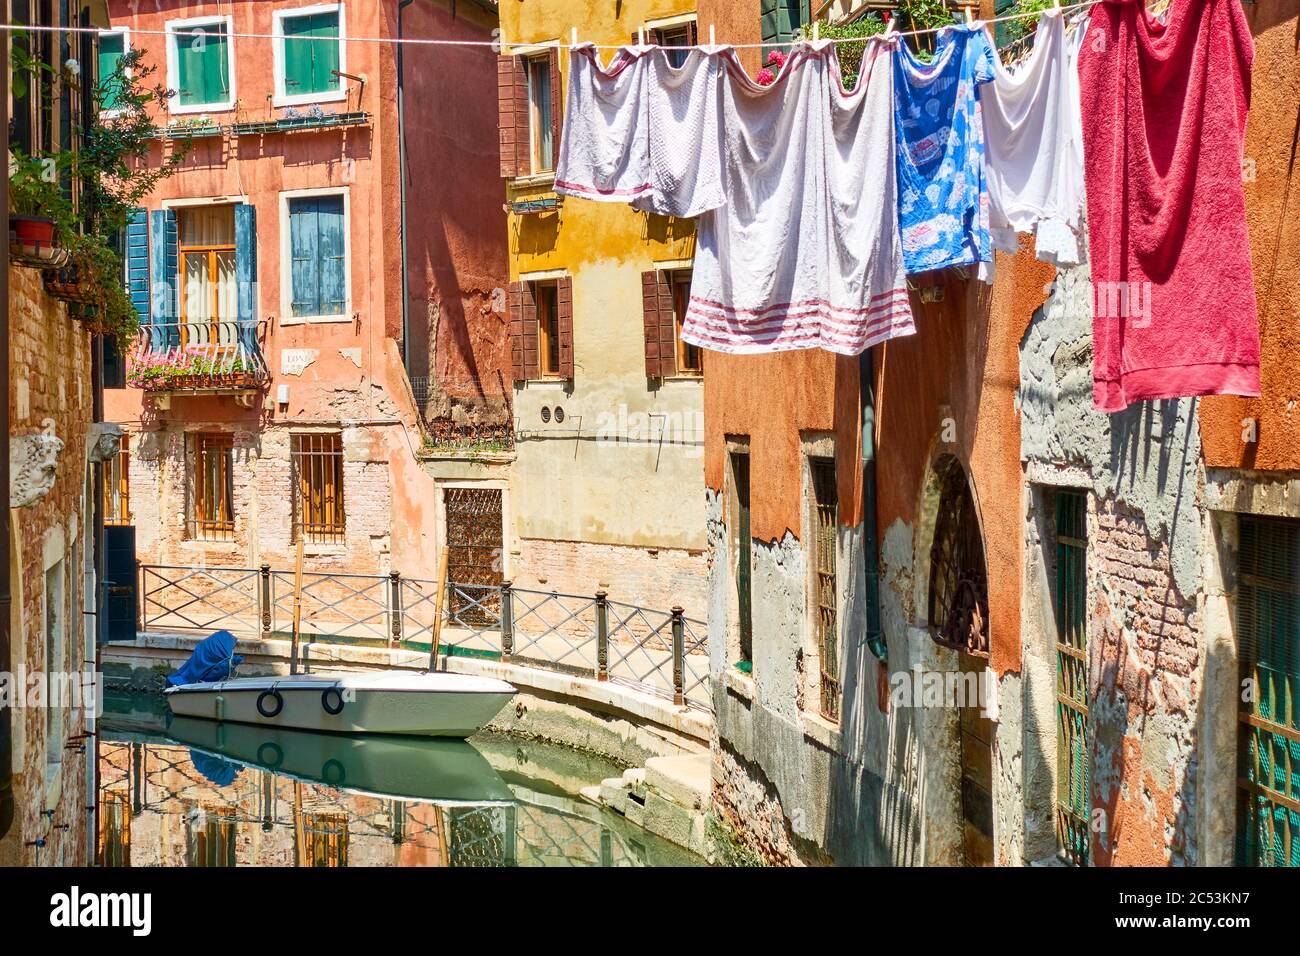 Colorful view of narrow venetian canal with drying linen outside, Venice, Italy - Italian urban landscape Stock Photo